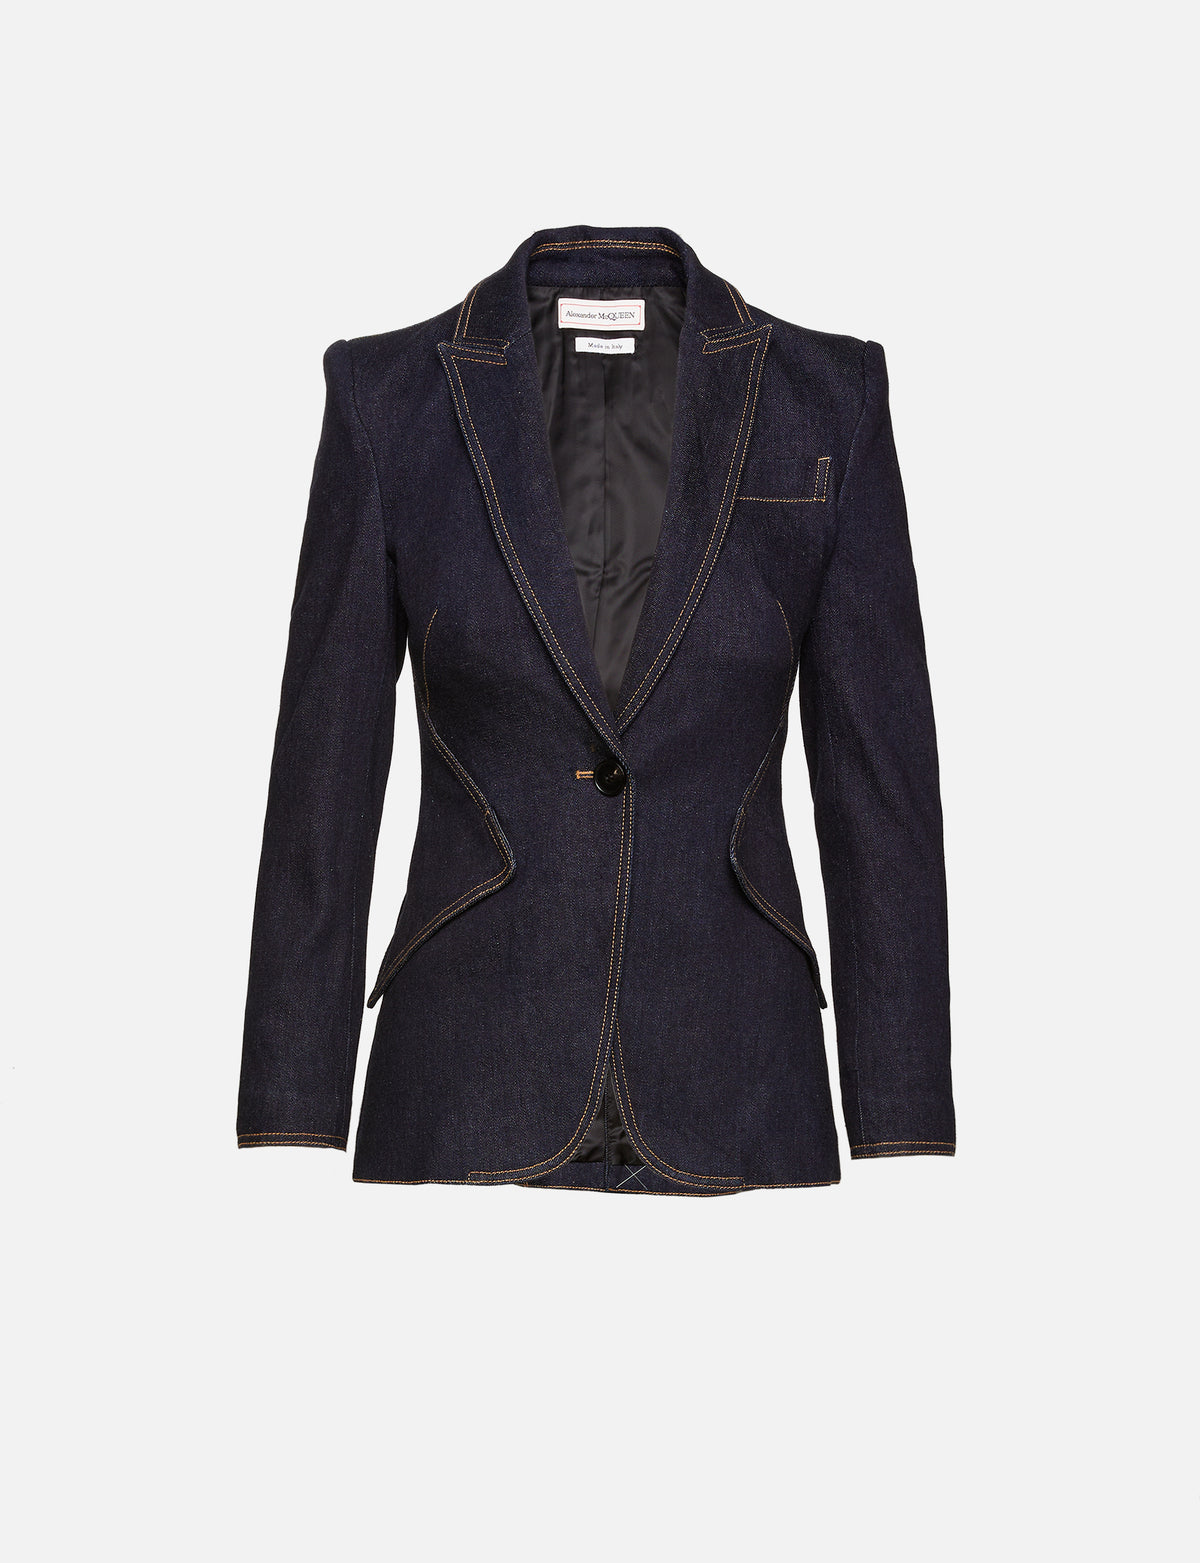 view 1 - One Button Stretch Jacket